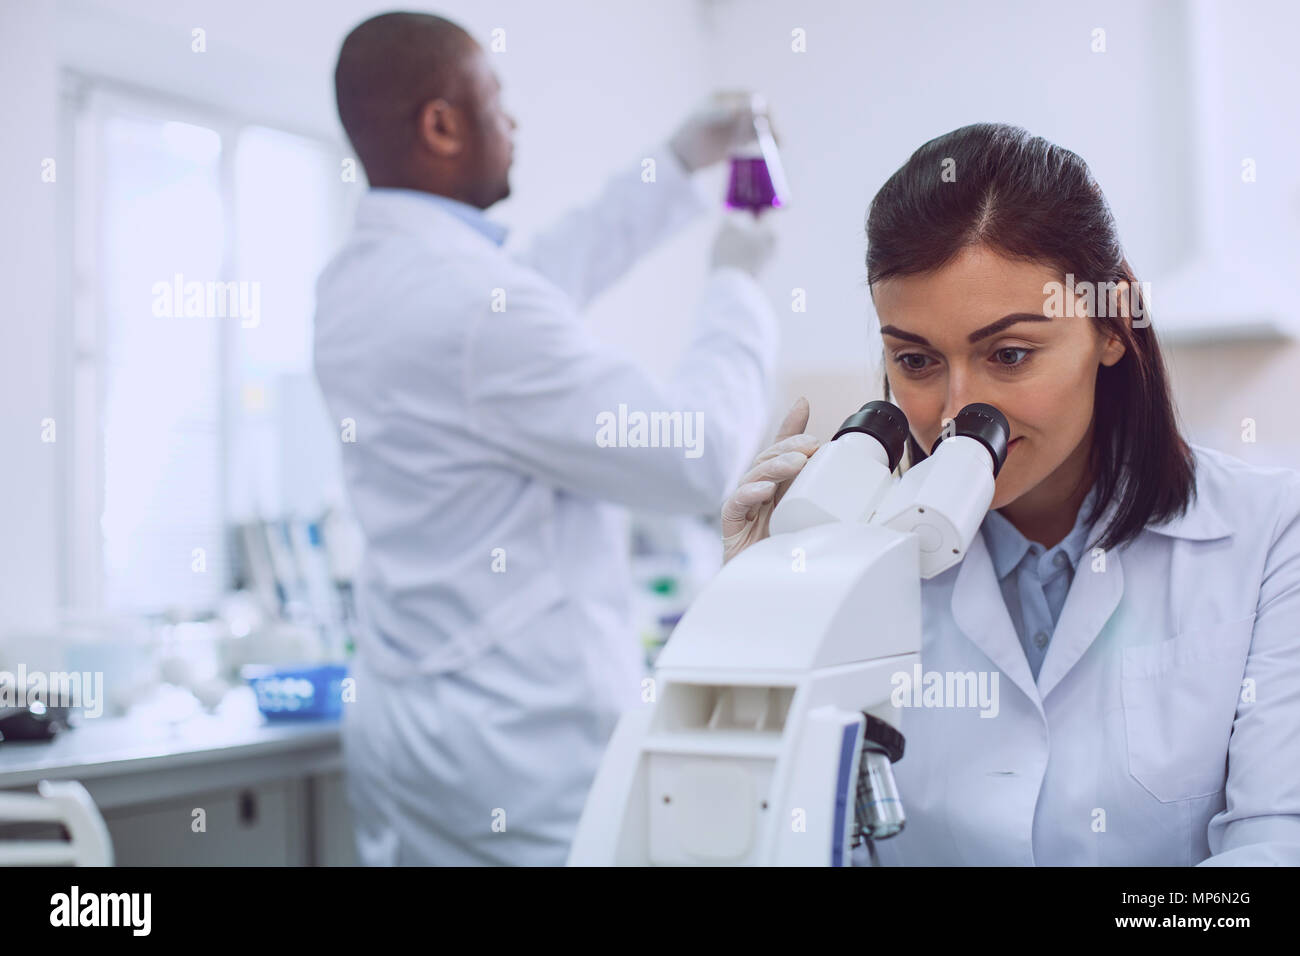 Skilled researcher looking into the microscope Stock Photo